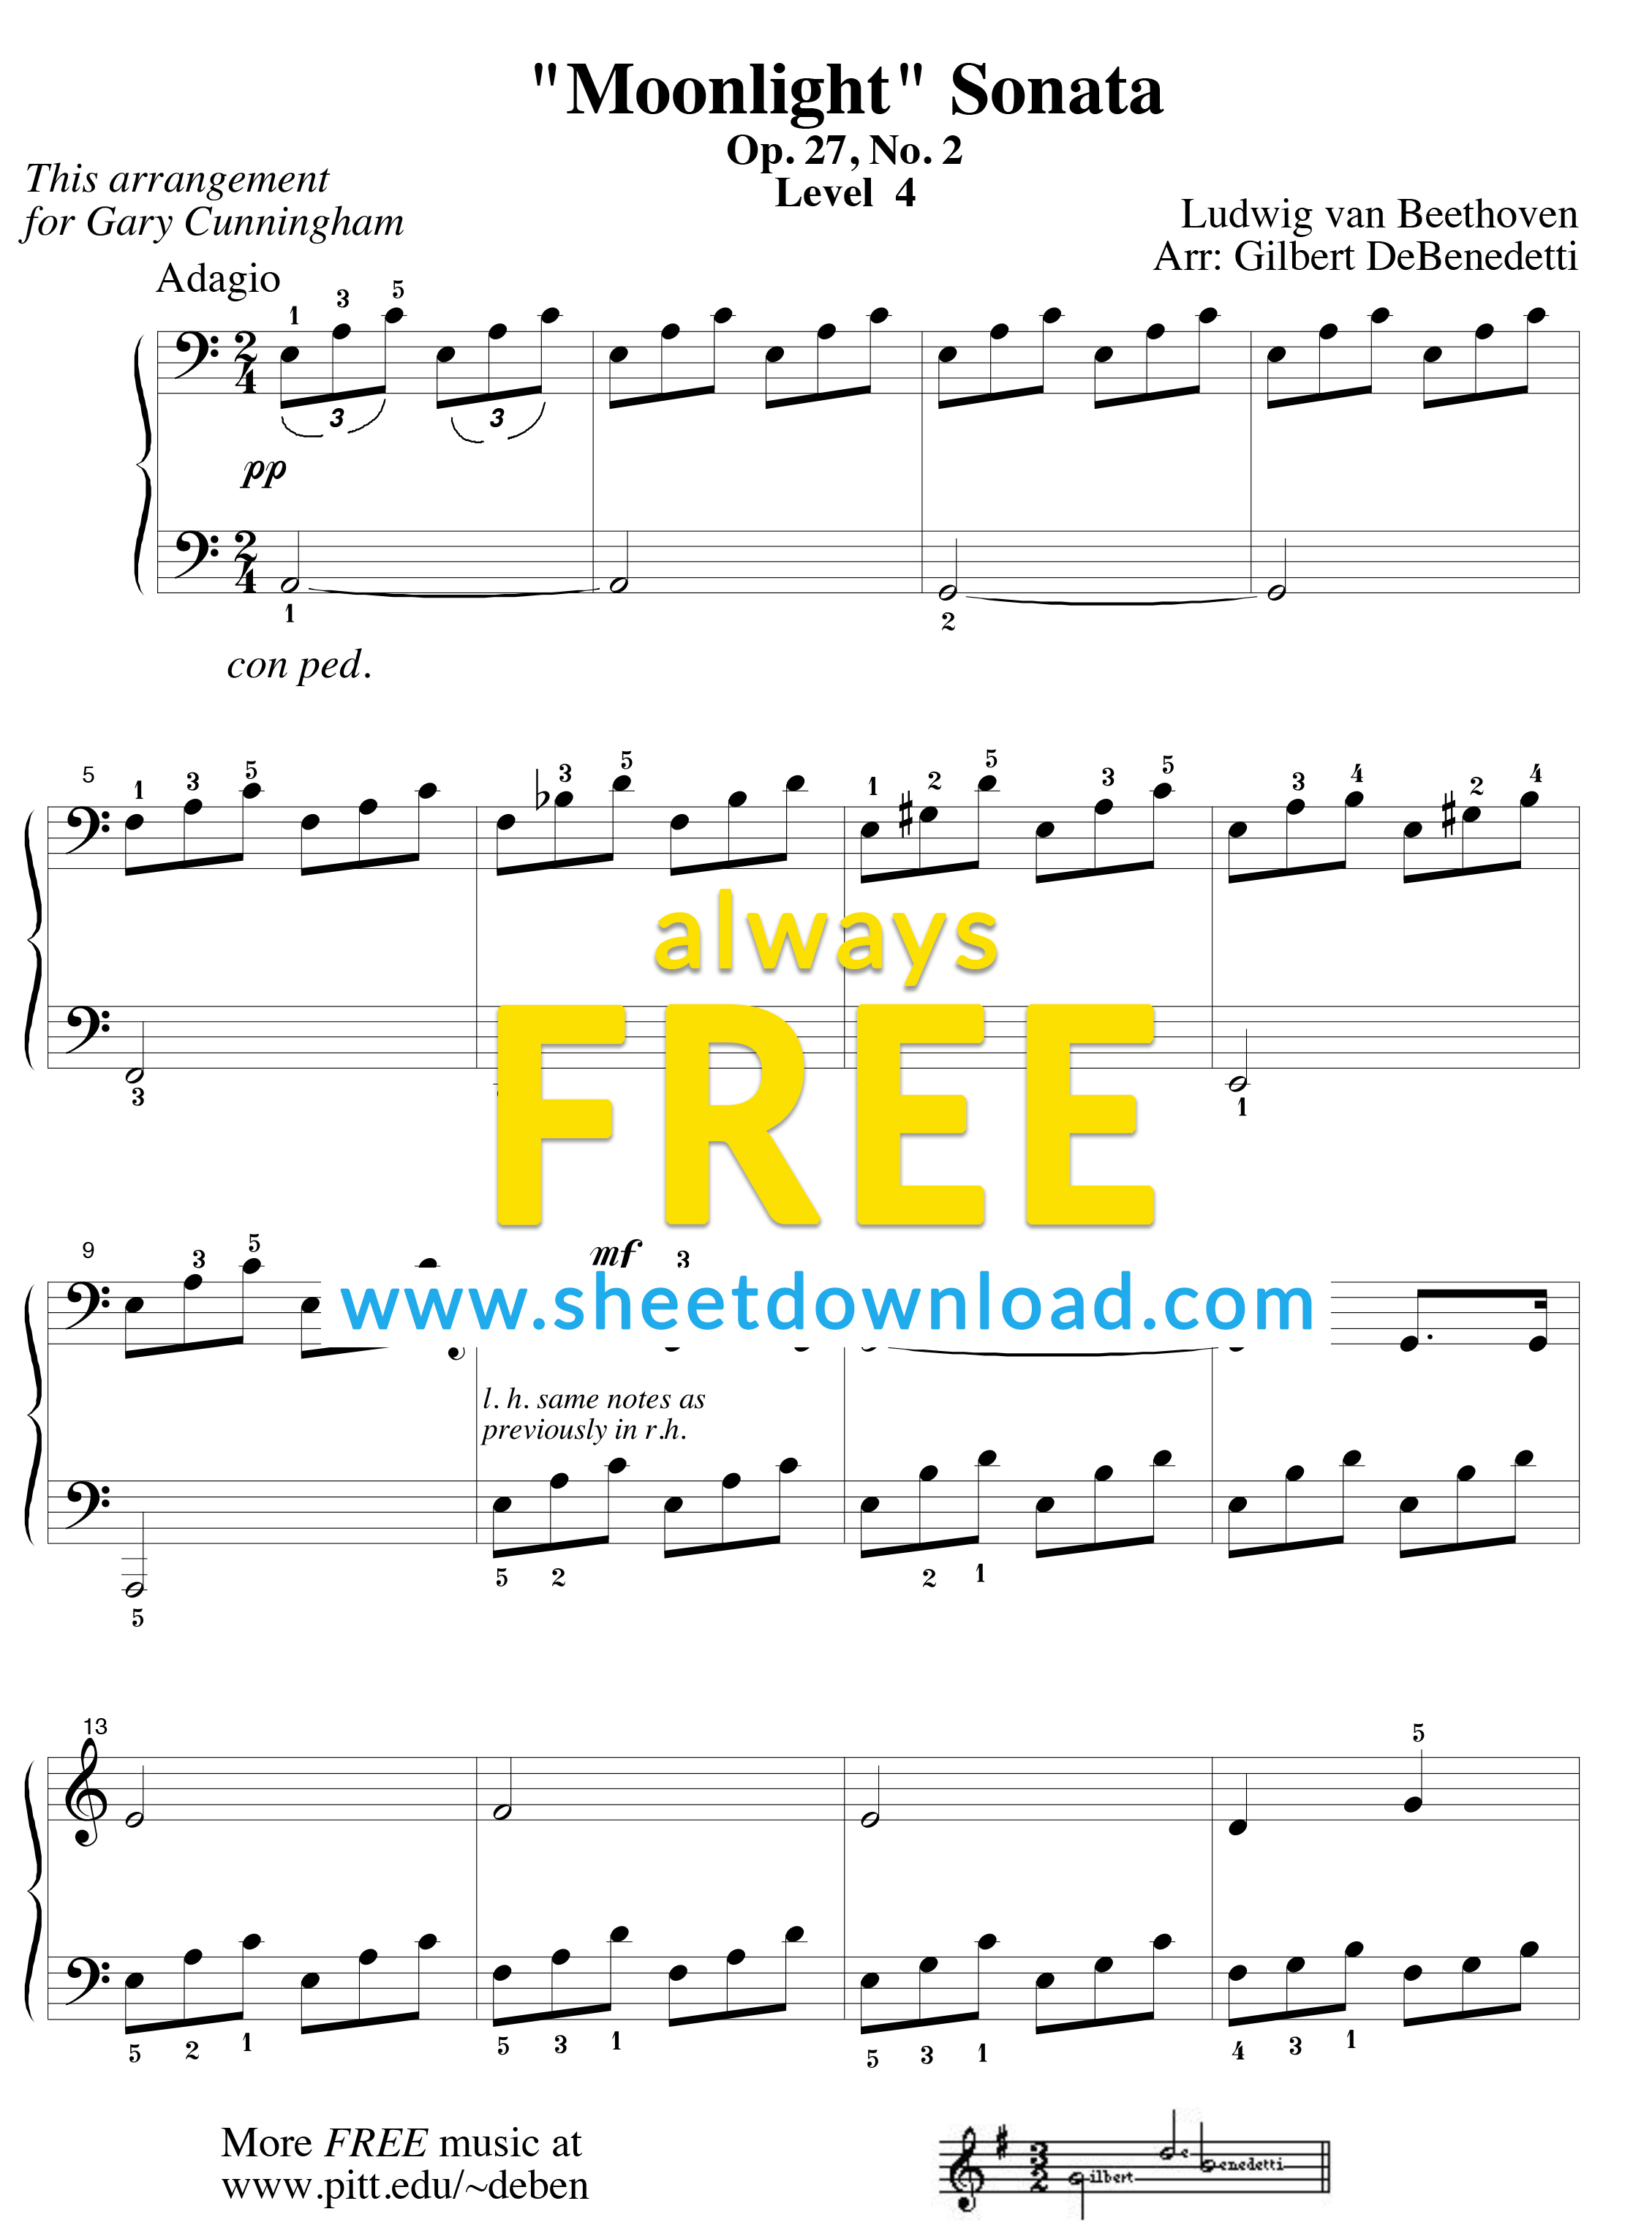 Top 100 Popular Piano Sheets Downloaded From Sheetdownload - Free Printable Piano Pieces